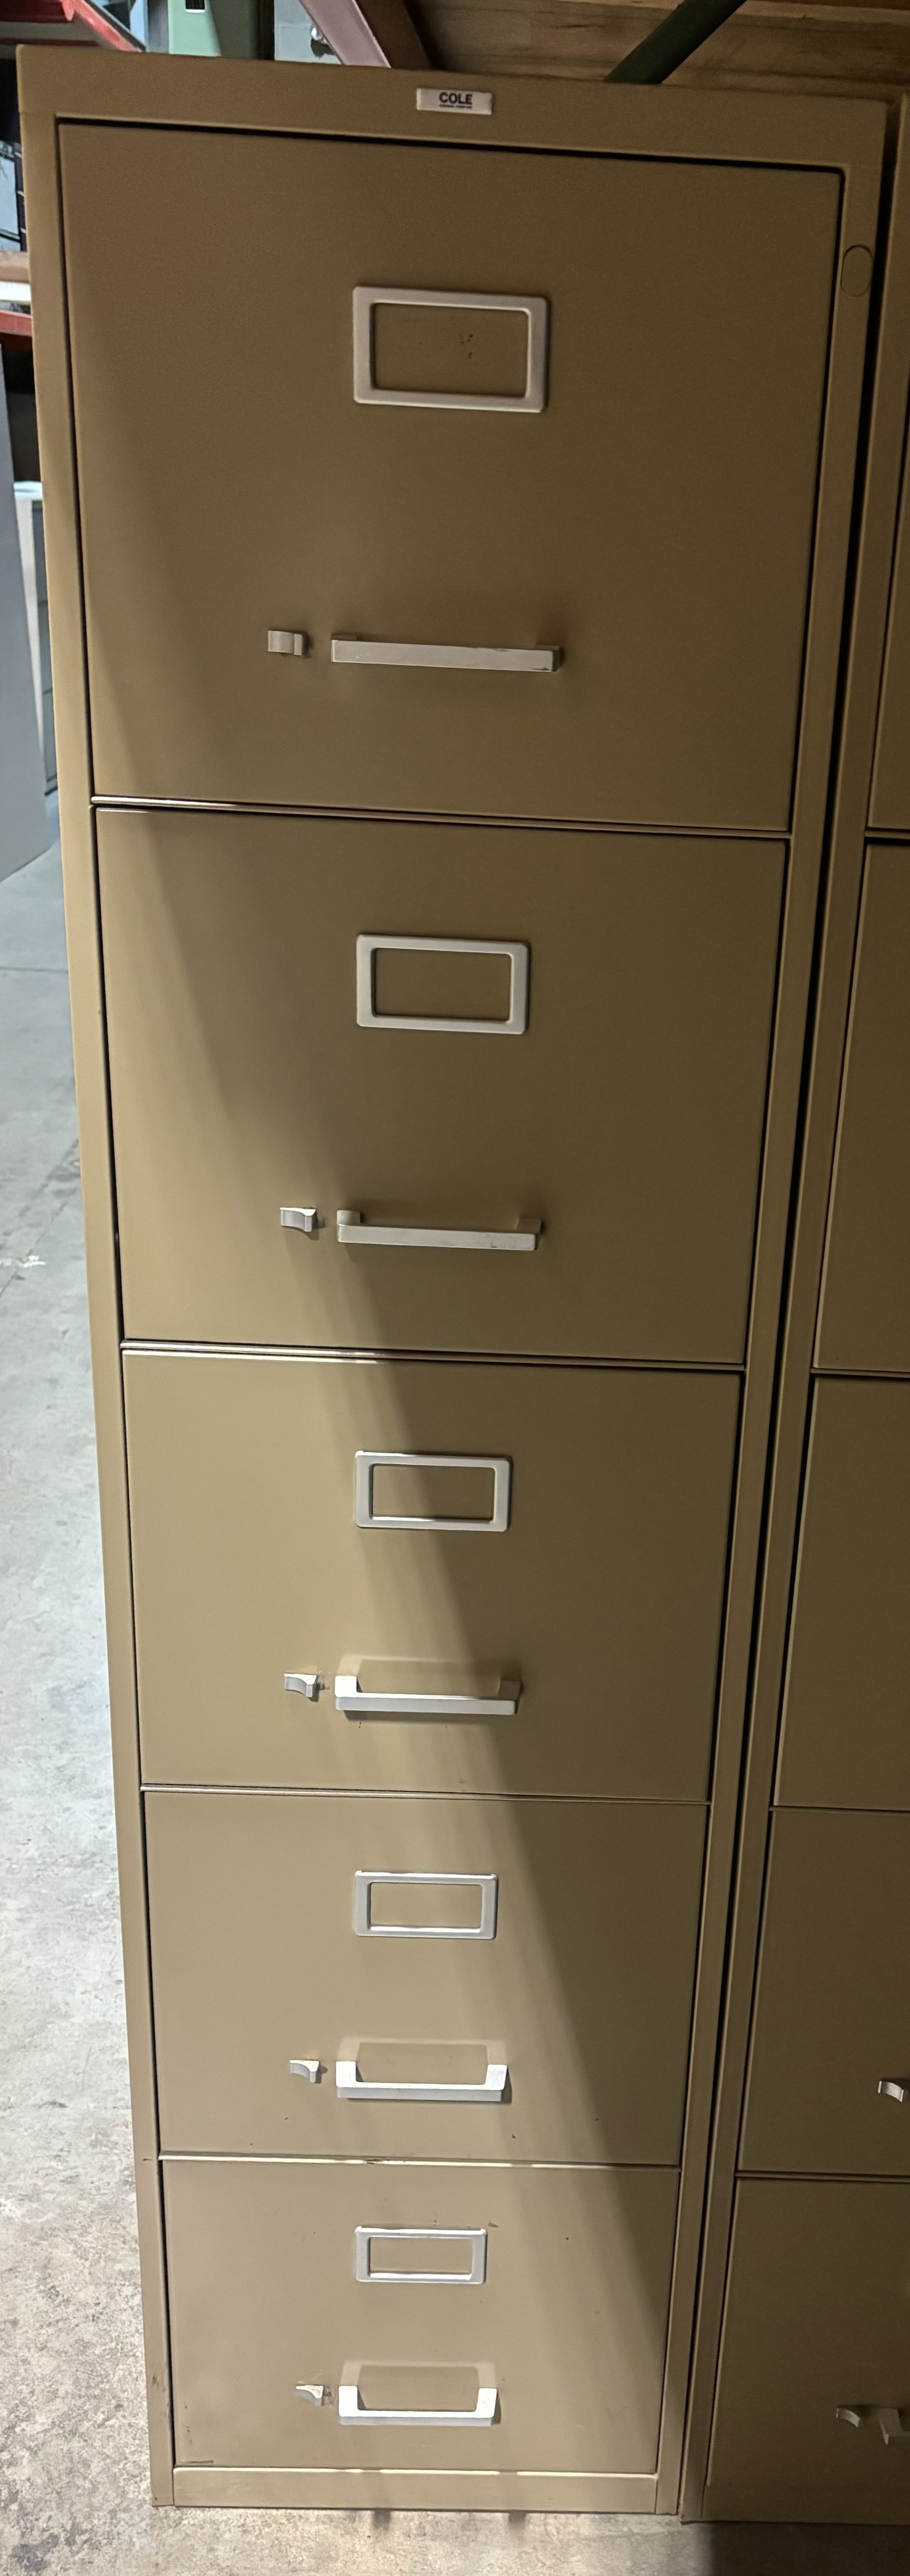 Cole 5 Drawer Vertical File 